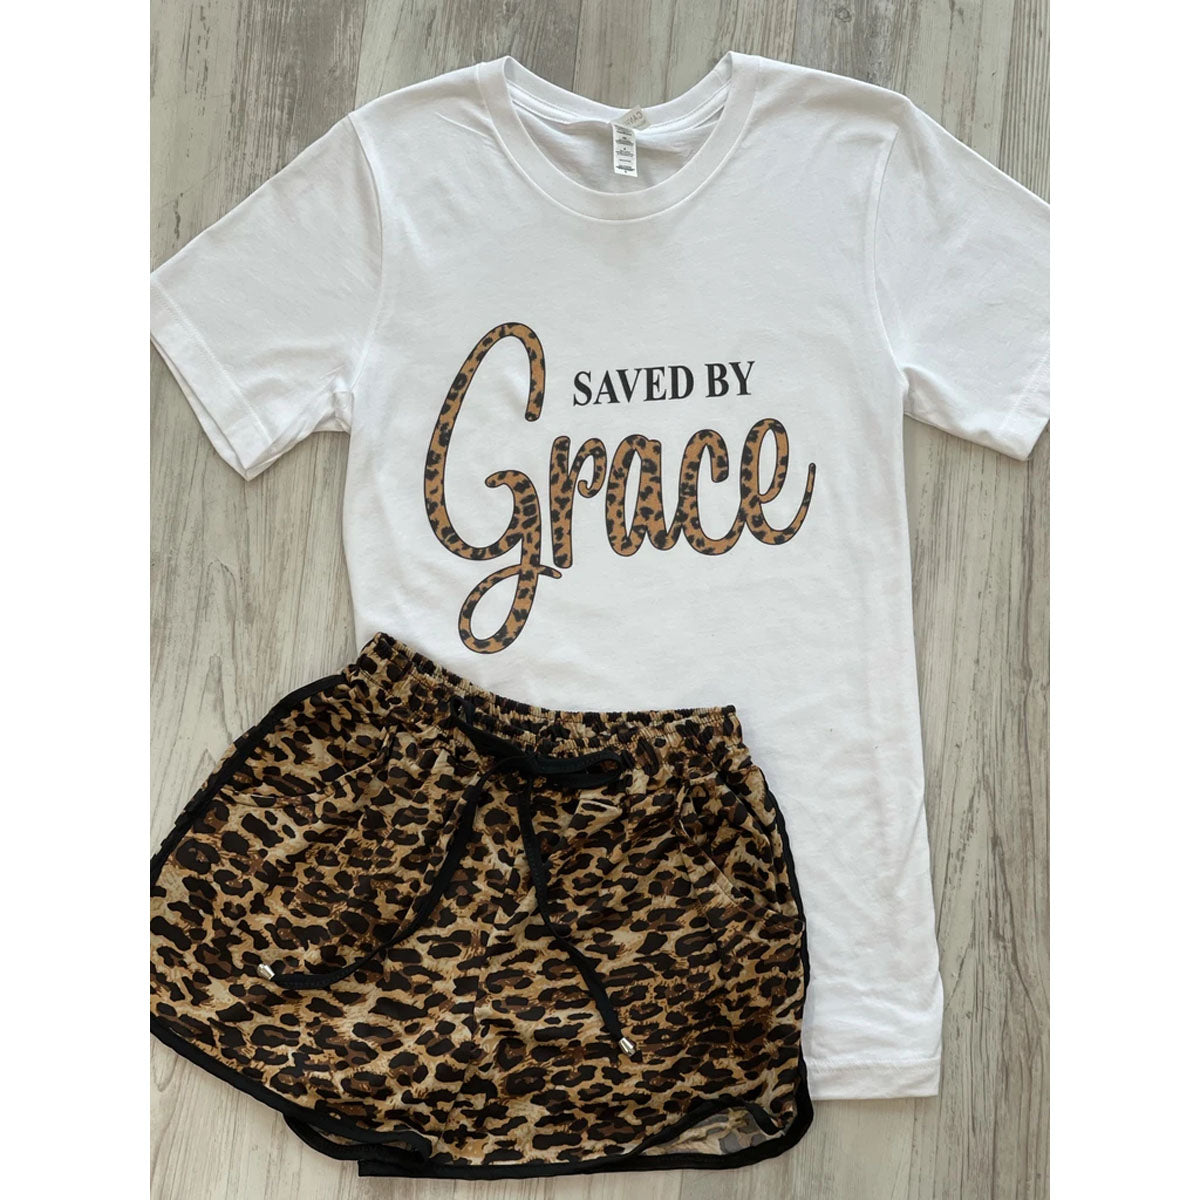 Saved By Grace Leopard Short Set (White Tee/Leopard Silk Shorts) - Southern Grace Creations